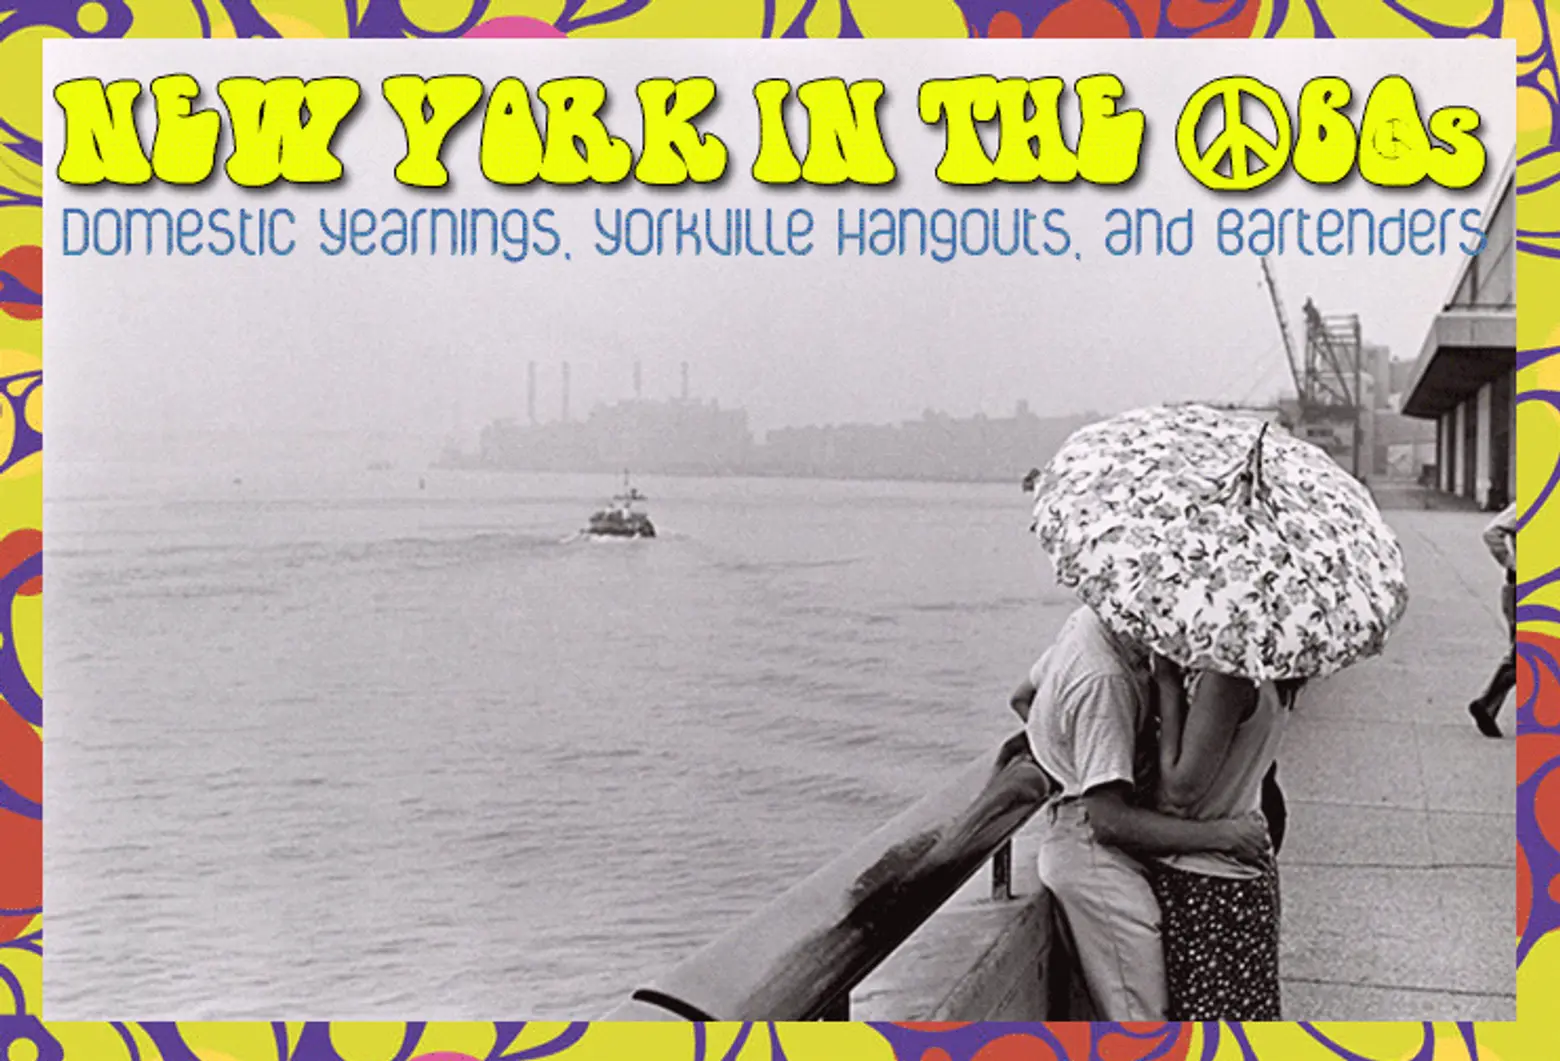 New York in the ’60s: Domestic Yearnings, Yorkville Hangouts and Bartenders